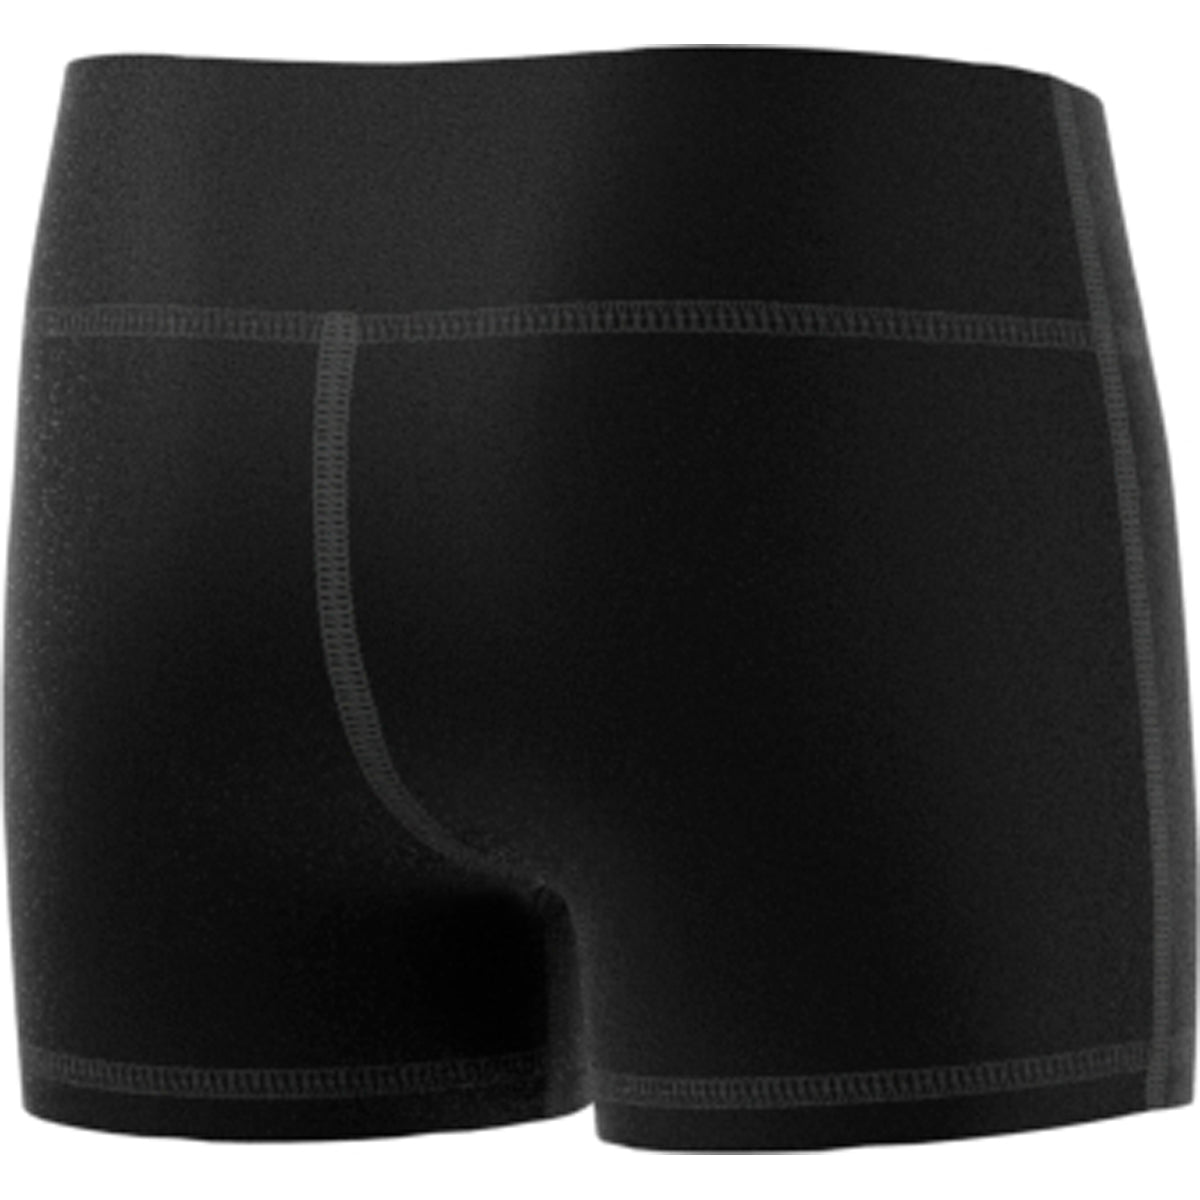 Adidas Youth Techfit 4 Inch Volleyball Short Tights - Black